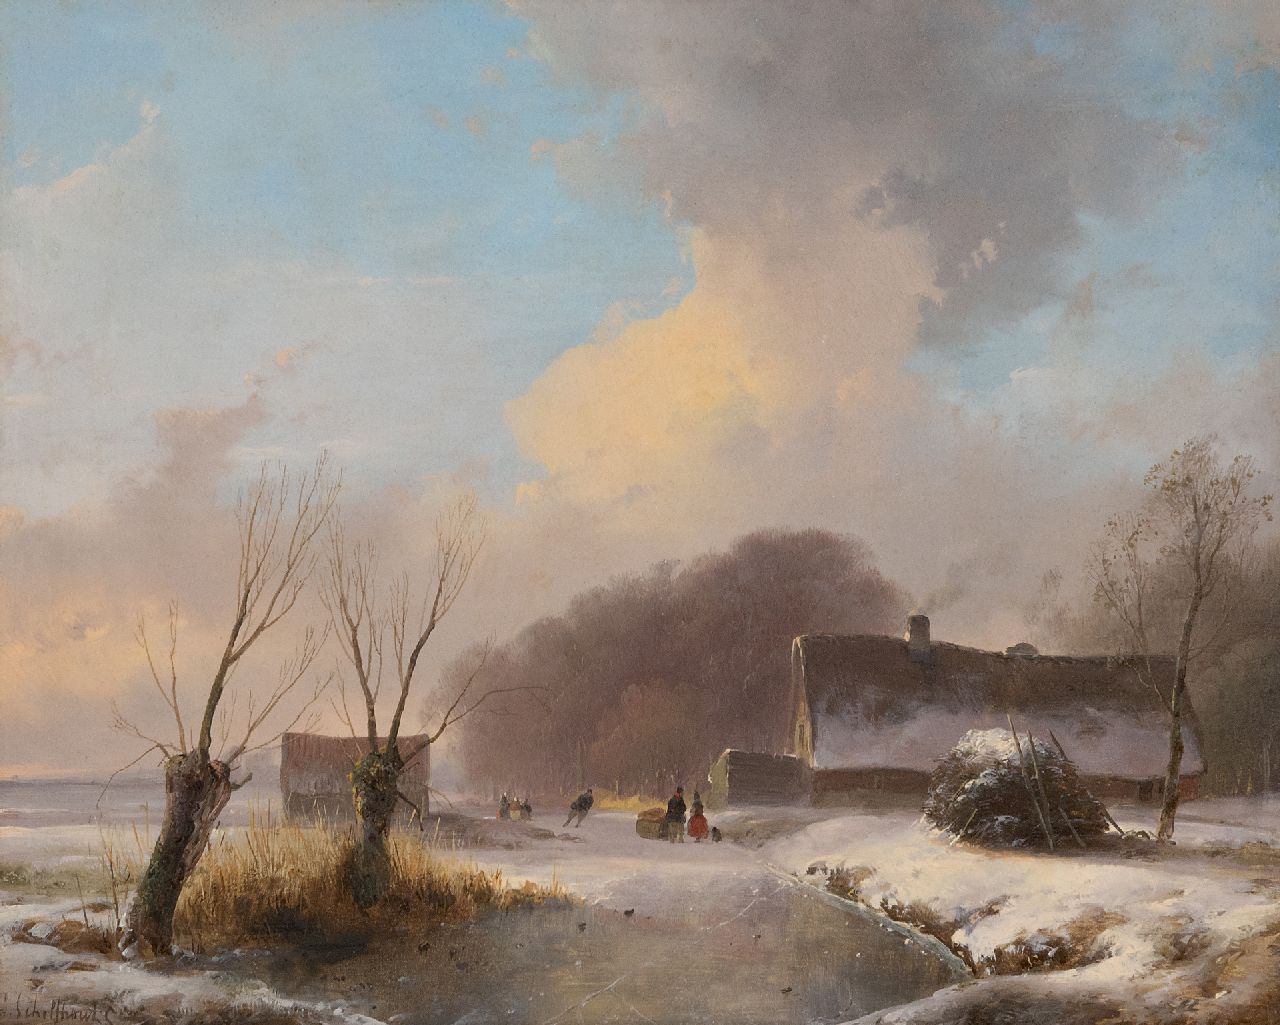 Schelfhout A.  | Andreas Schelfhout, A skater and figures on a frozen waterway, oil on panel 29.7 x 36.7 cm, signed l.l. and painted ca. 1833